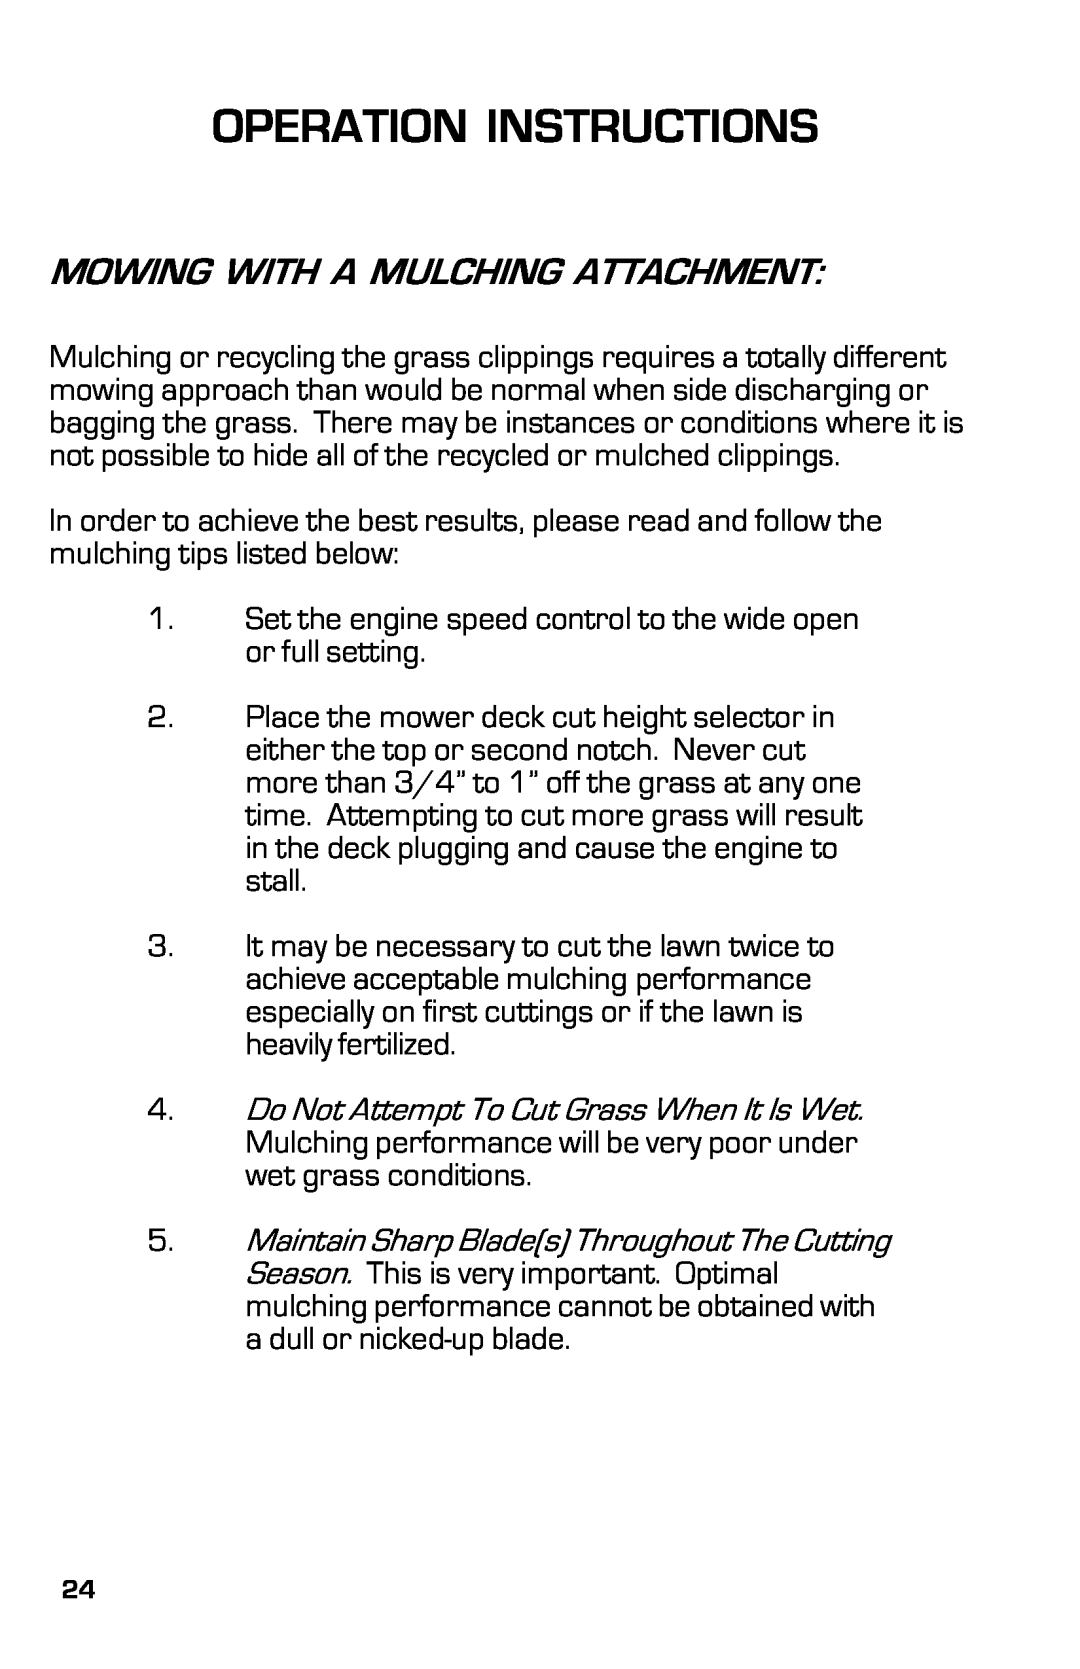 Dixon 2003, 13639-0702 manual Operation Instructions, Mowing With A Mulching Attachment 